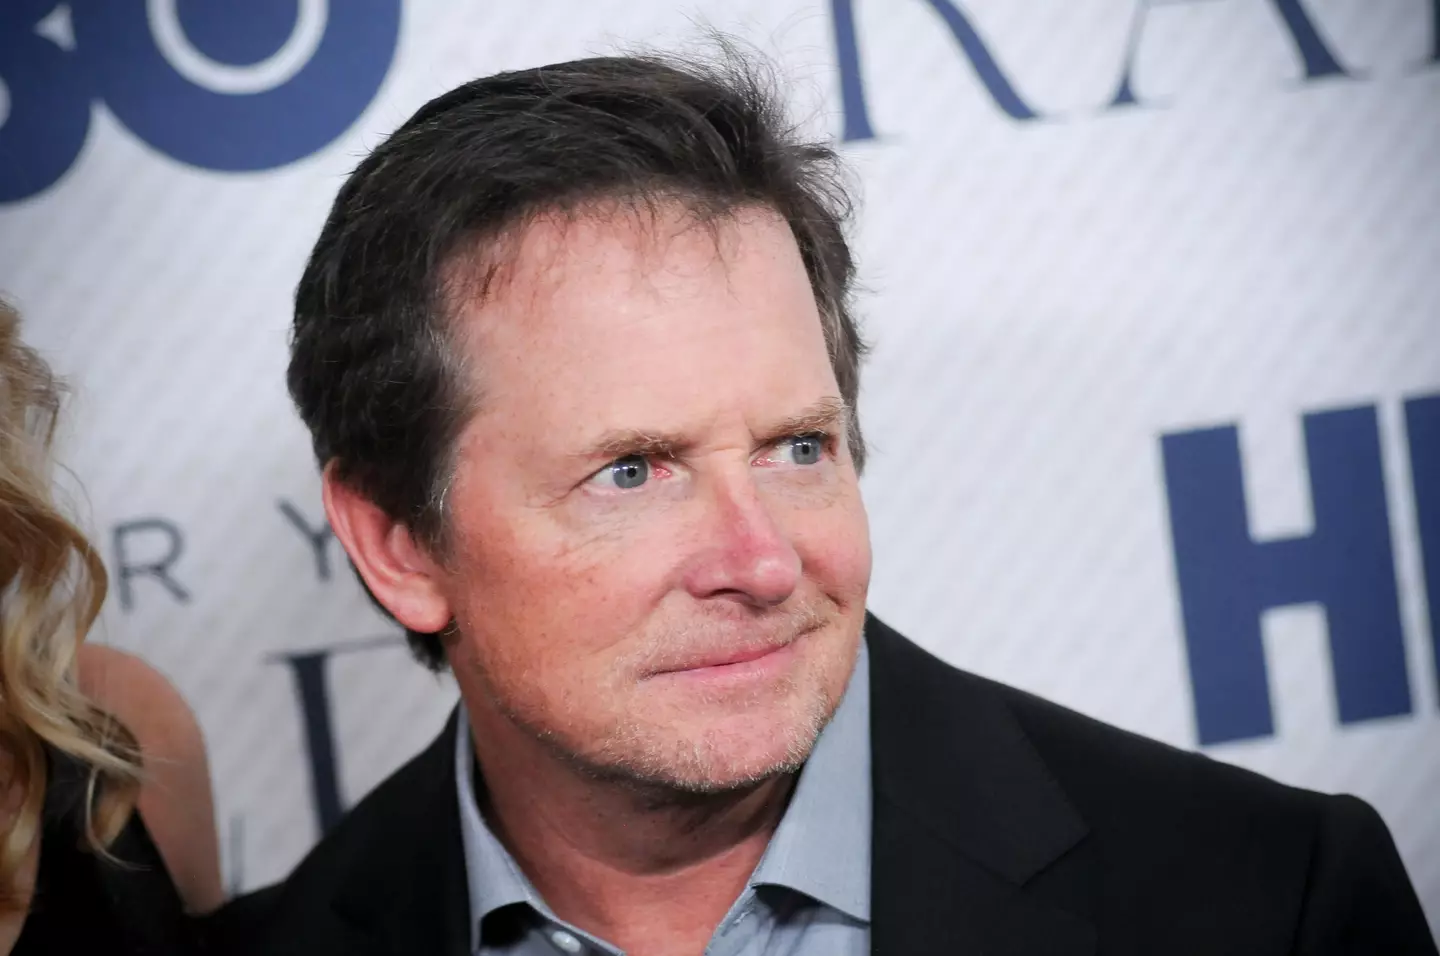 Michael J. Fox was diagnosed with Parkinson's in 1991.